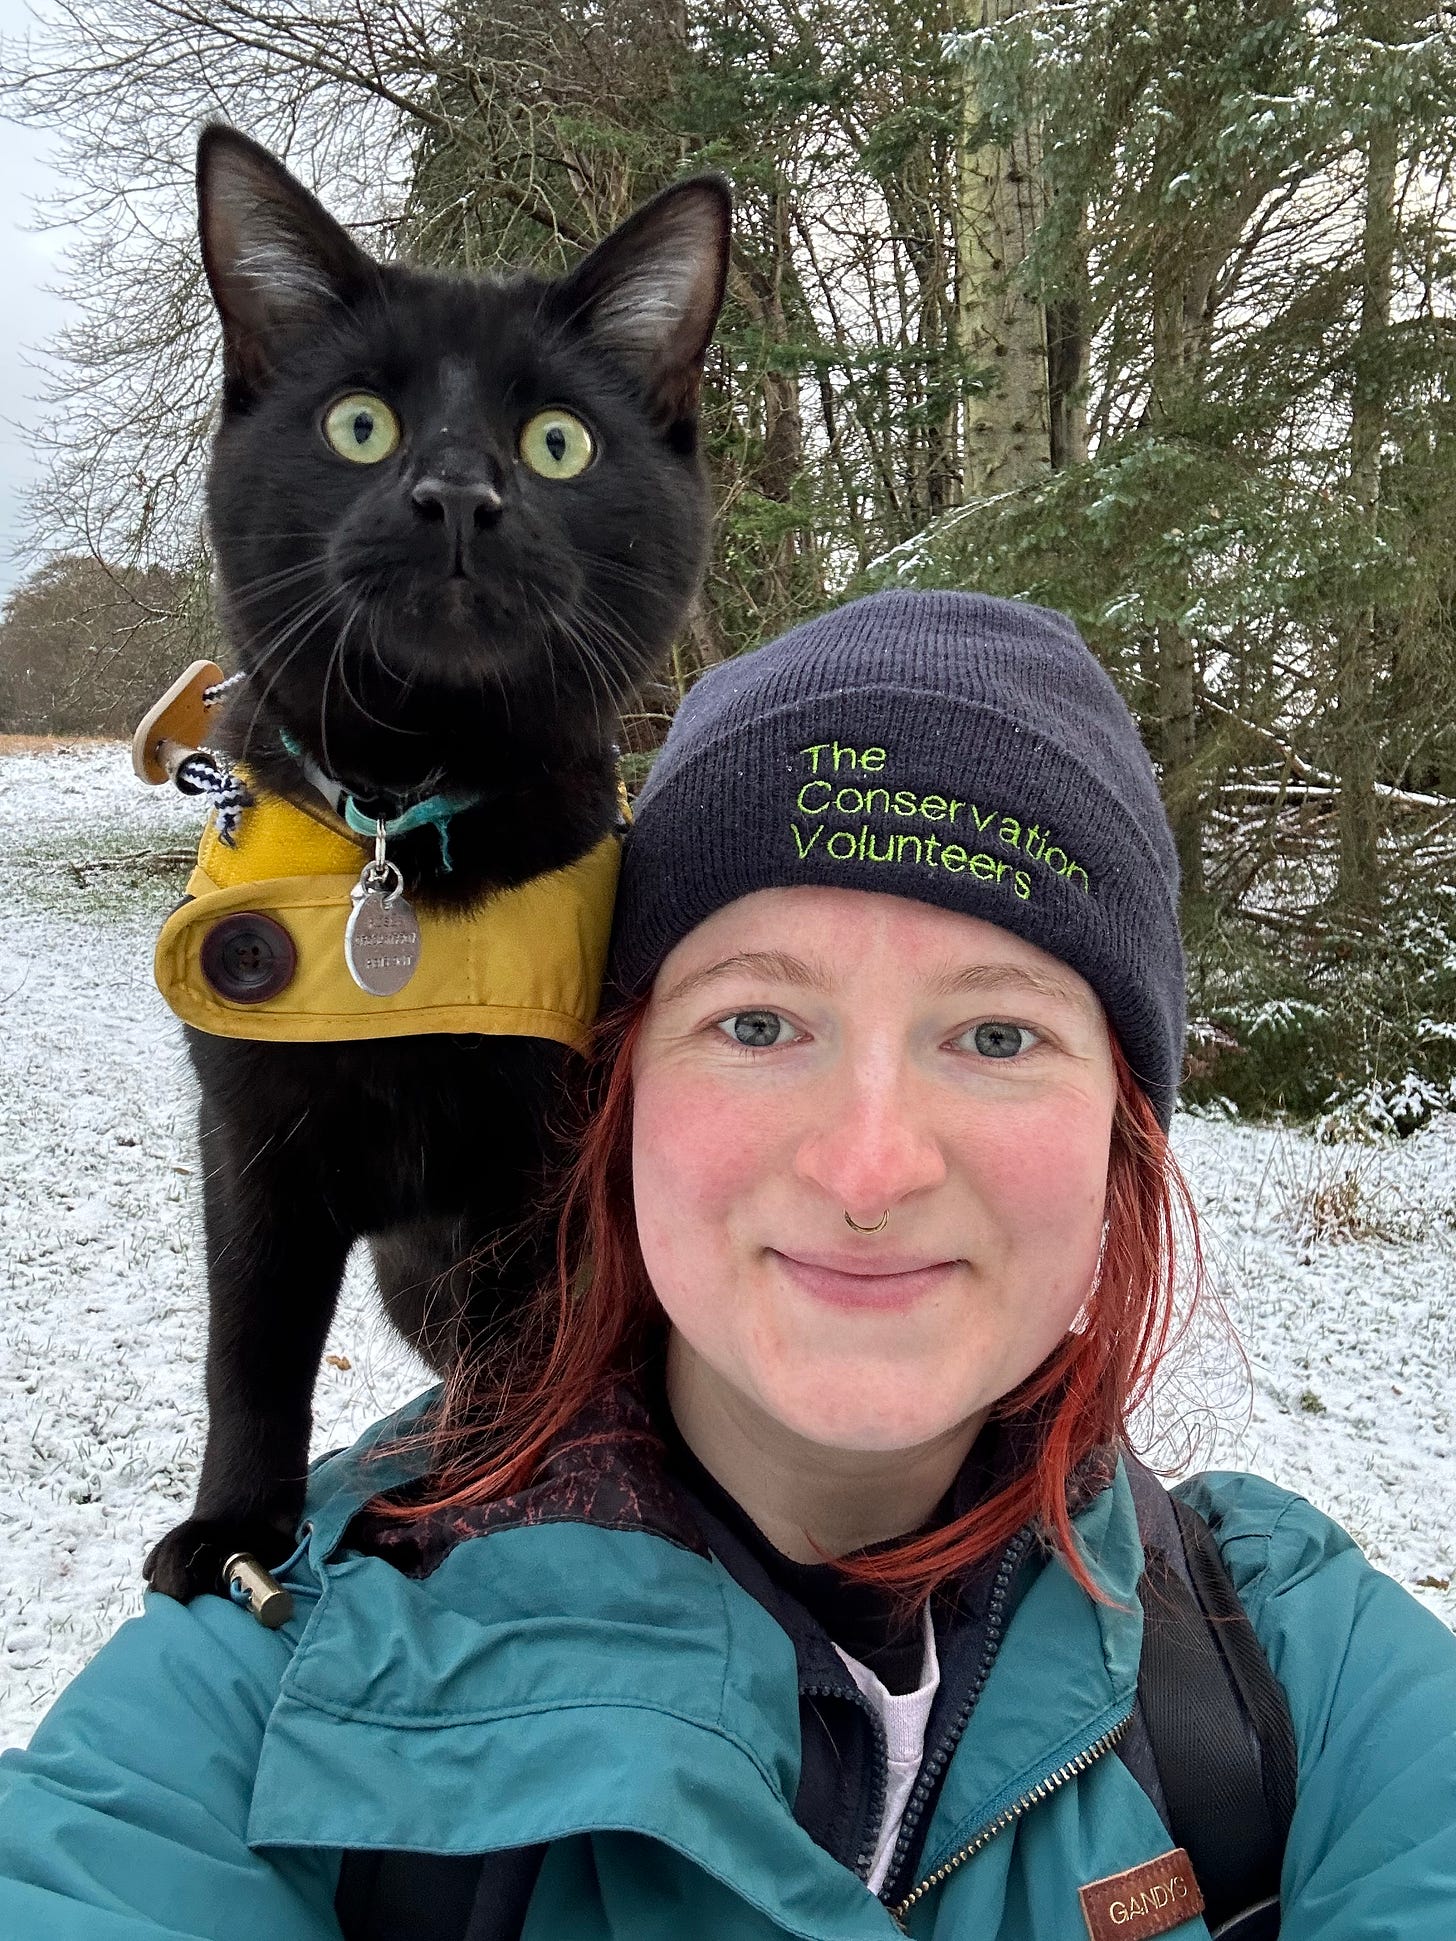 Rosie is wearing a blue coat and a blue beanie, with a black cat (Jasper) stood on her shoulder. Jasper is wearing a yellow coat. They're stood in front of a group of trees, there's snow on the ground.